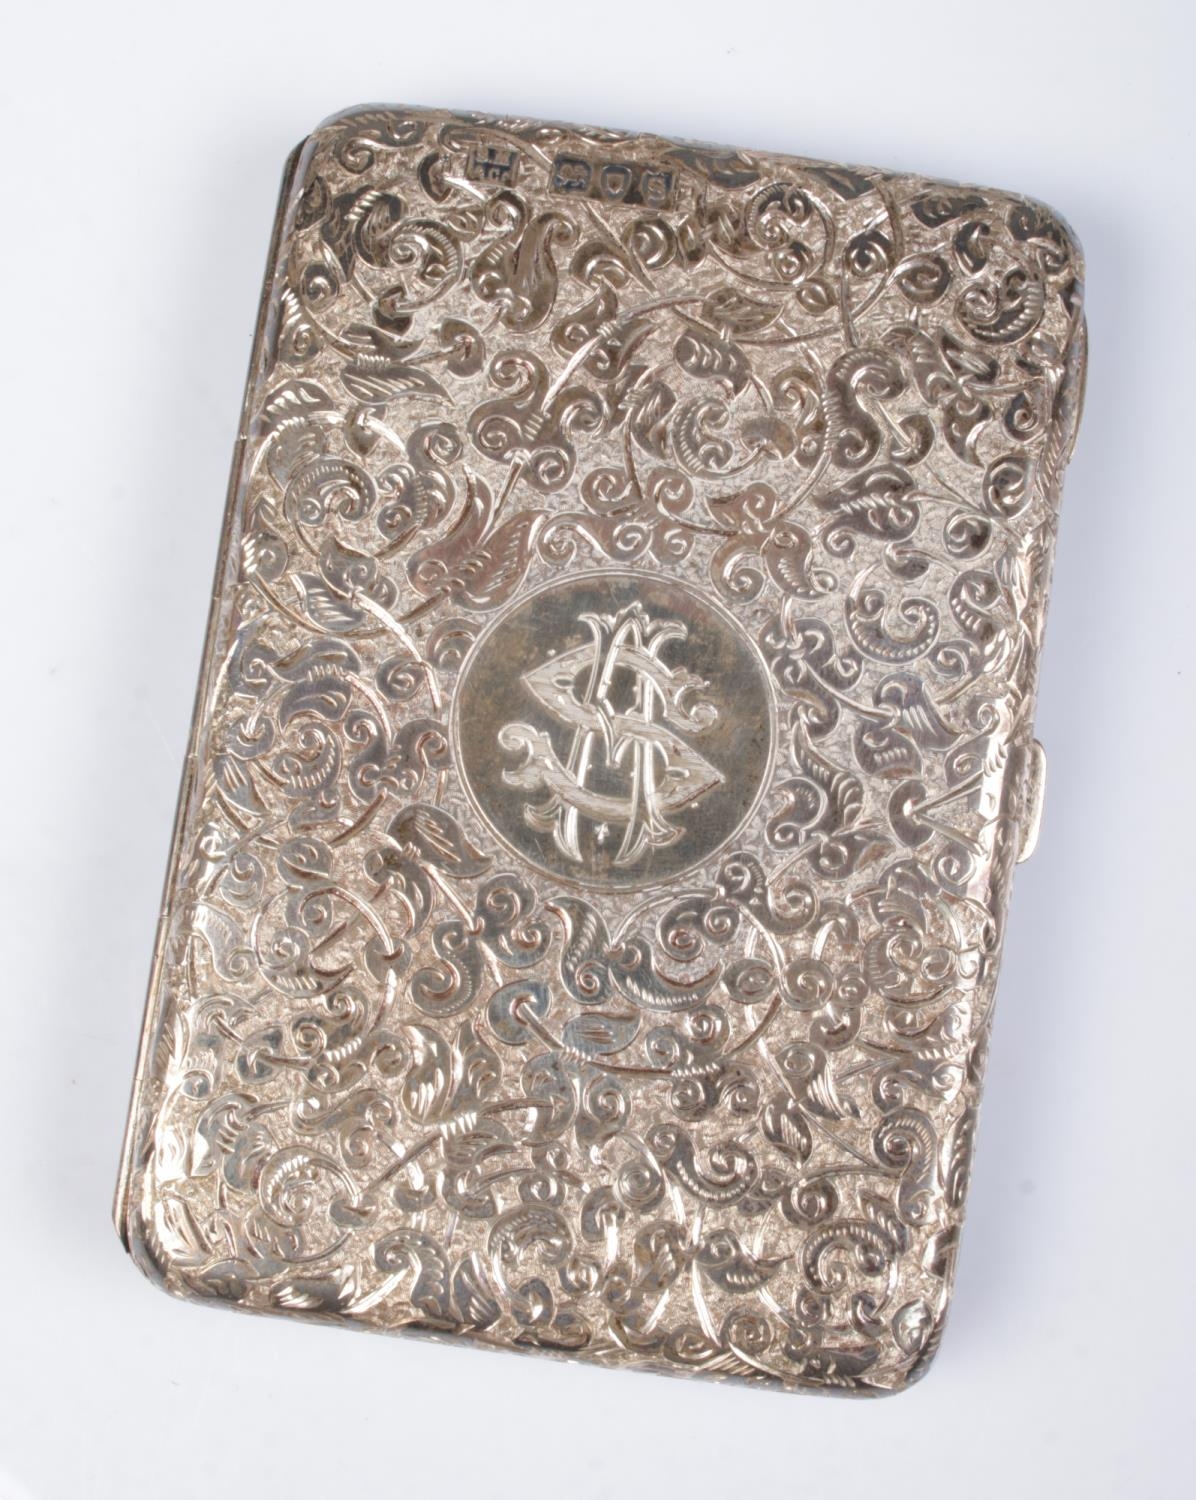 A Victorian silver evening purse by Sampson Mordan & Co. featuring heavily decorated floral exterior